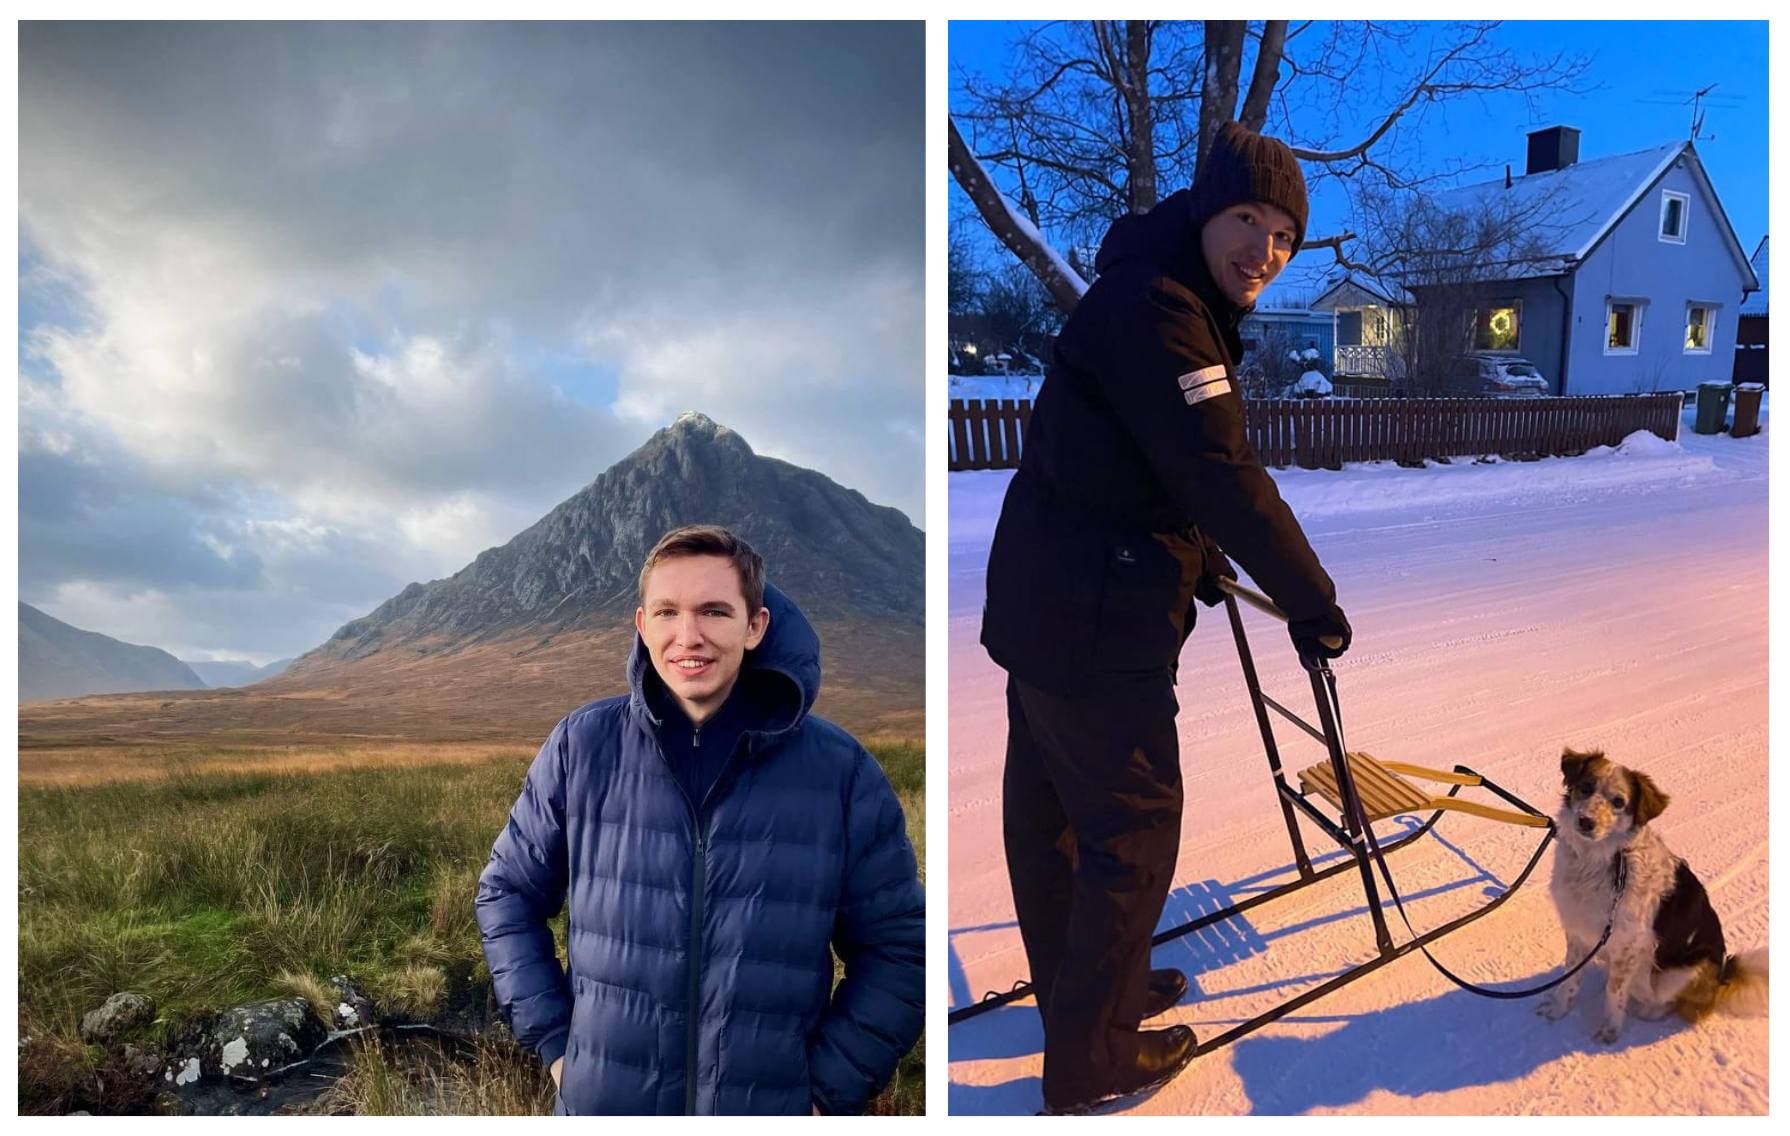 On a trip to Glencoe in Scotland, November 2021 (left); With one of five adopted dogs, Kajsa, preparing to go downhill on a Swedish sled, December 2021 (right). Photos: Beatrice Bucht.